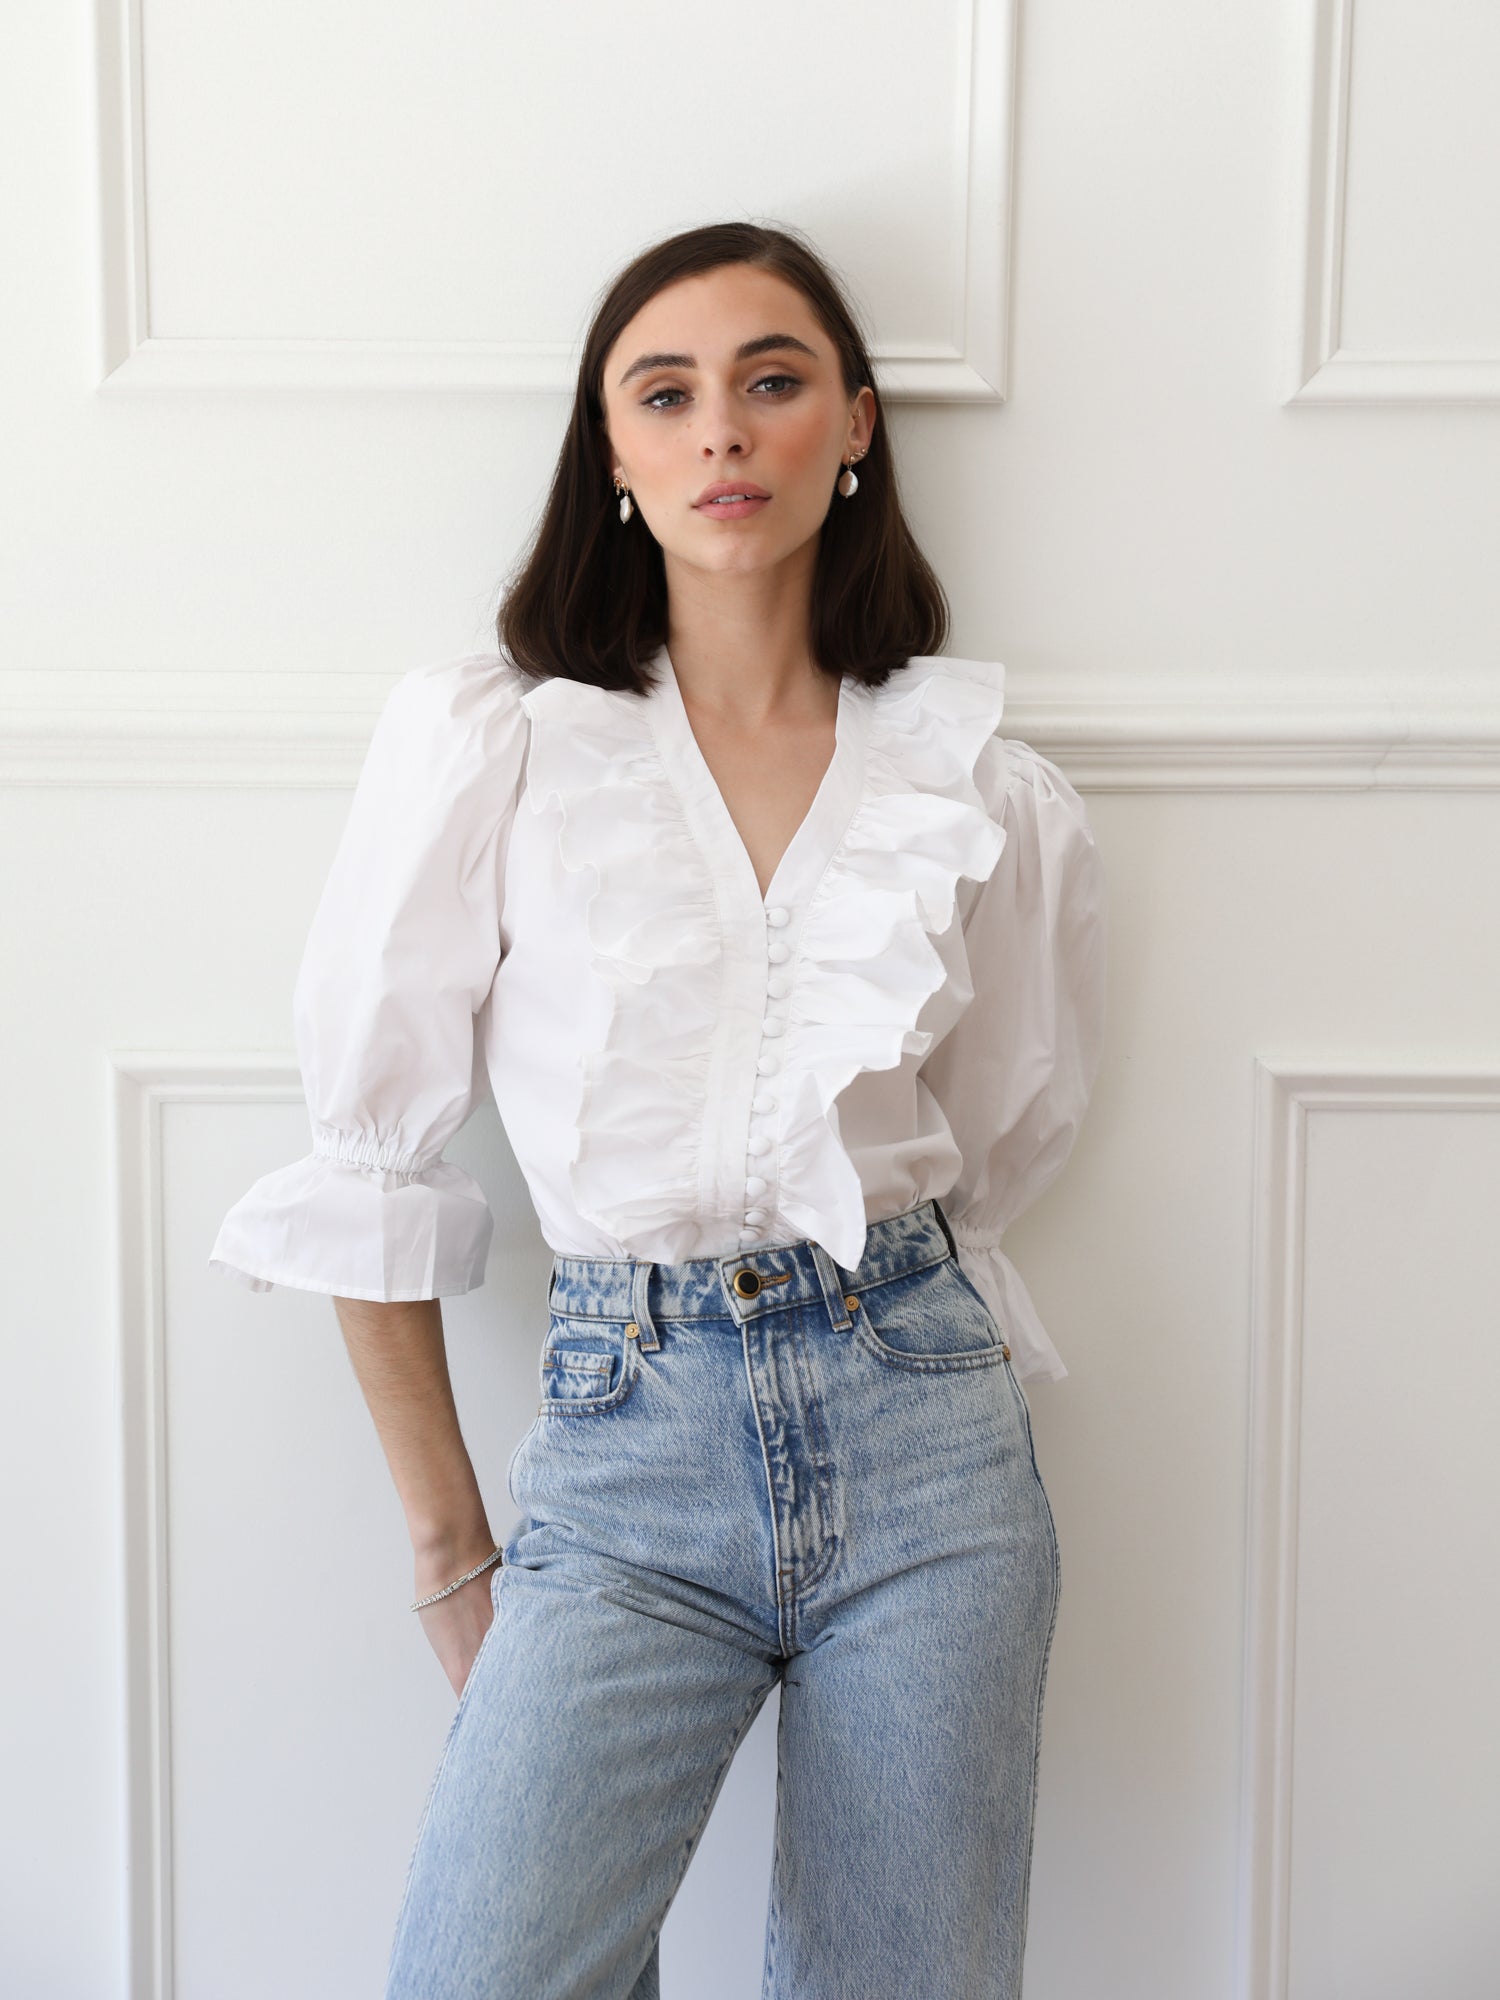 MILLE Clothing Hanna Top in White